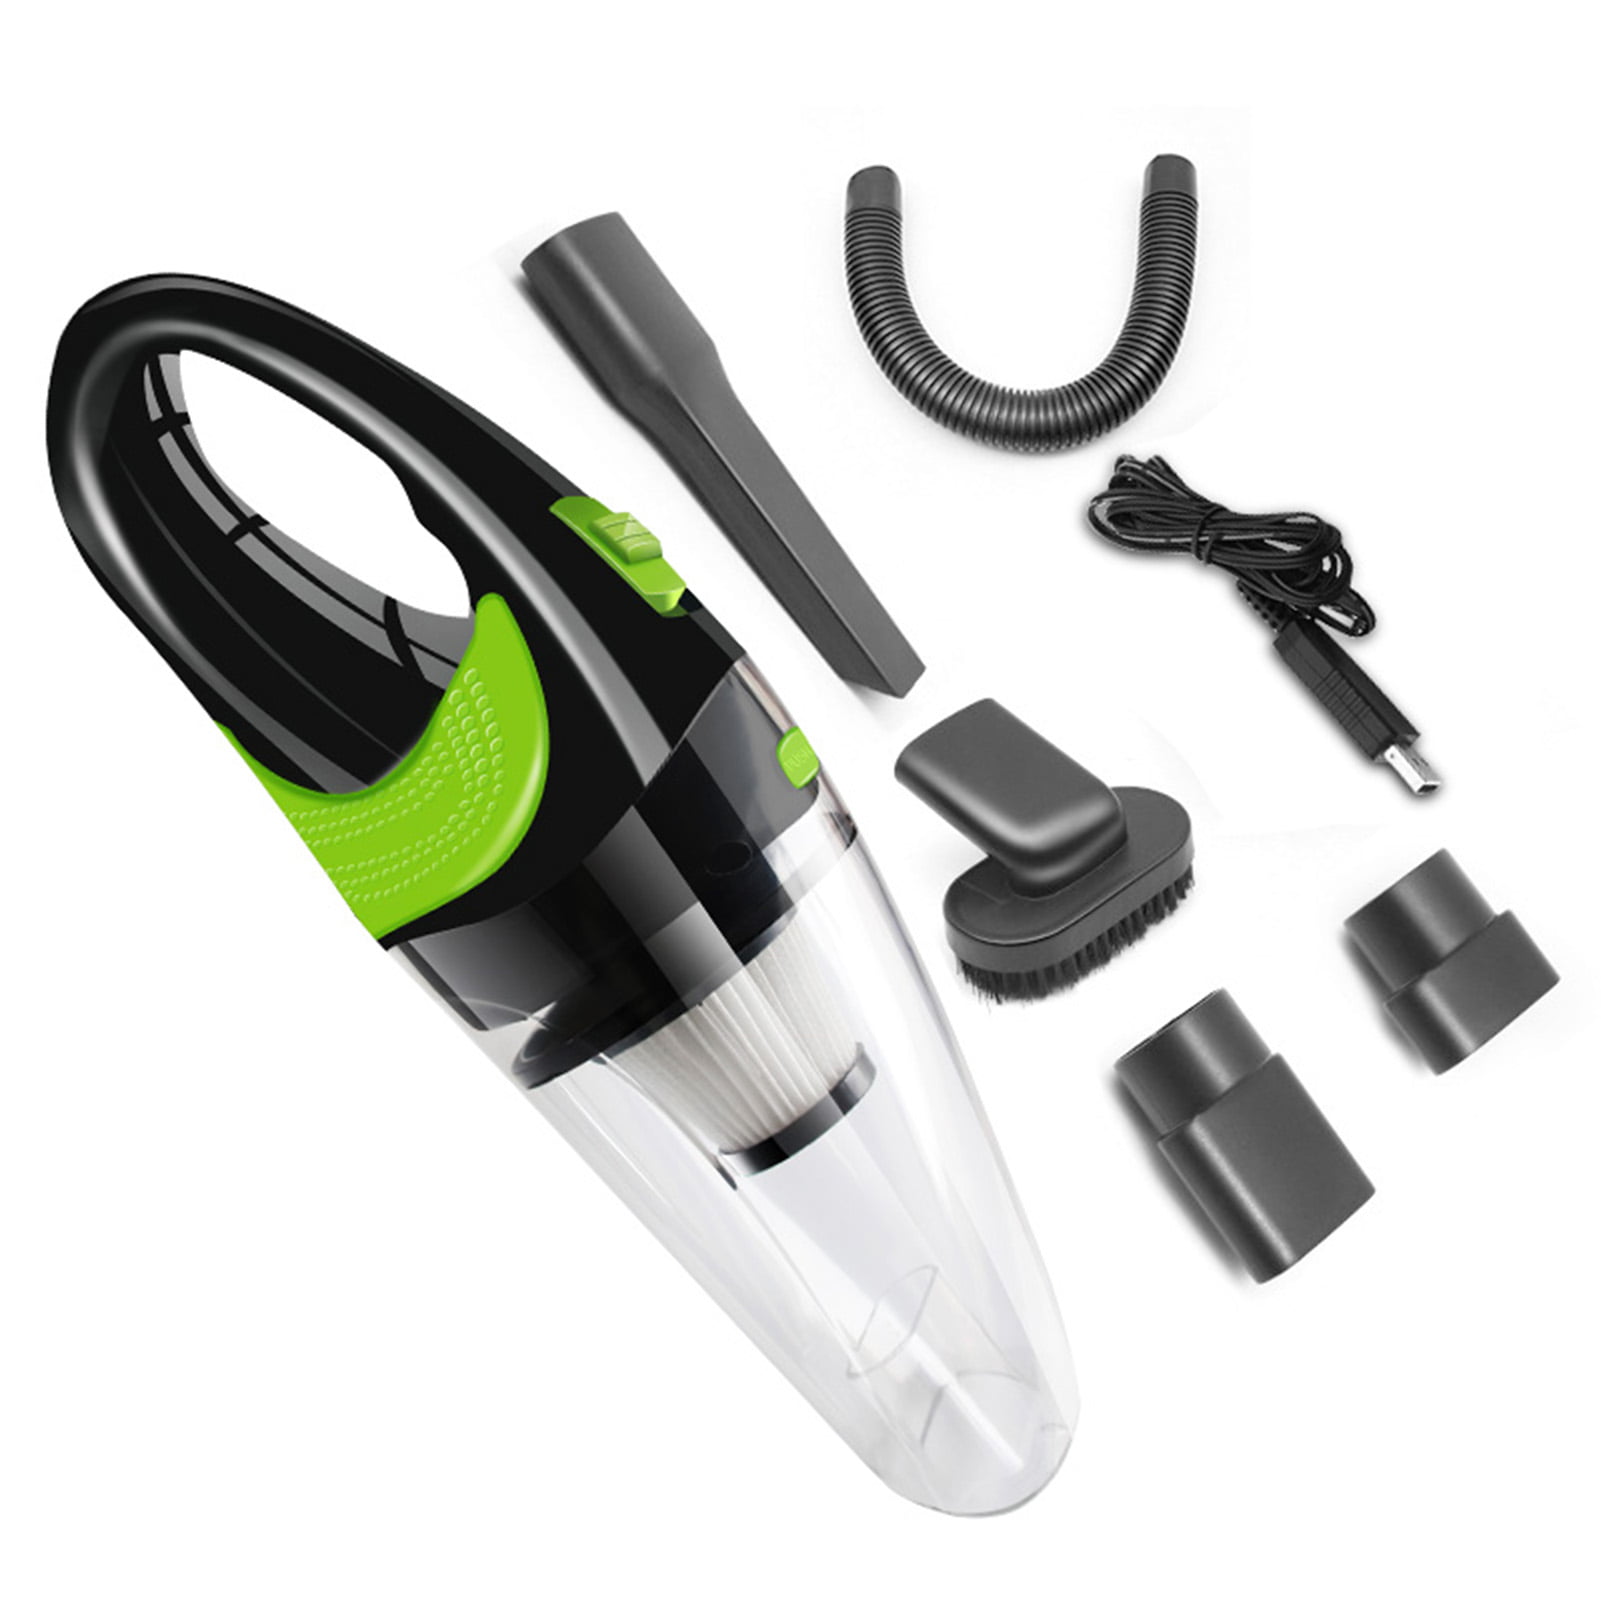 Portable Cordless Car Vacuum Cleaner Handheld Small Wireless for Car & Home 120W 